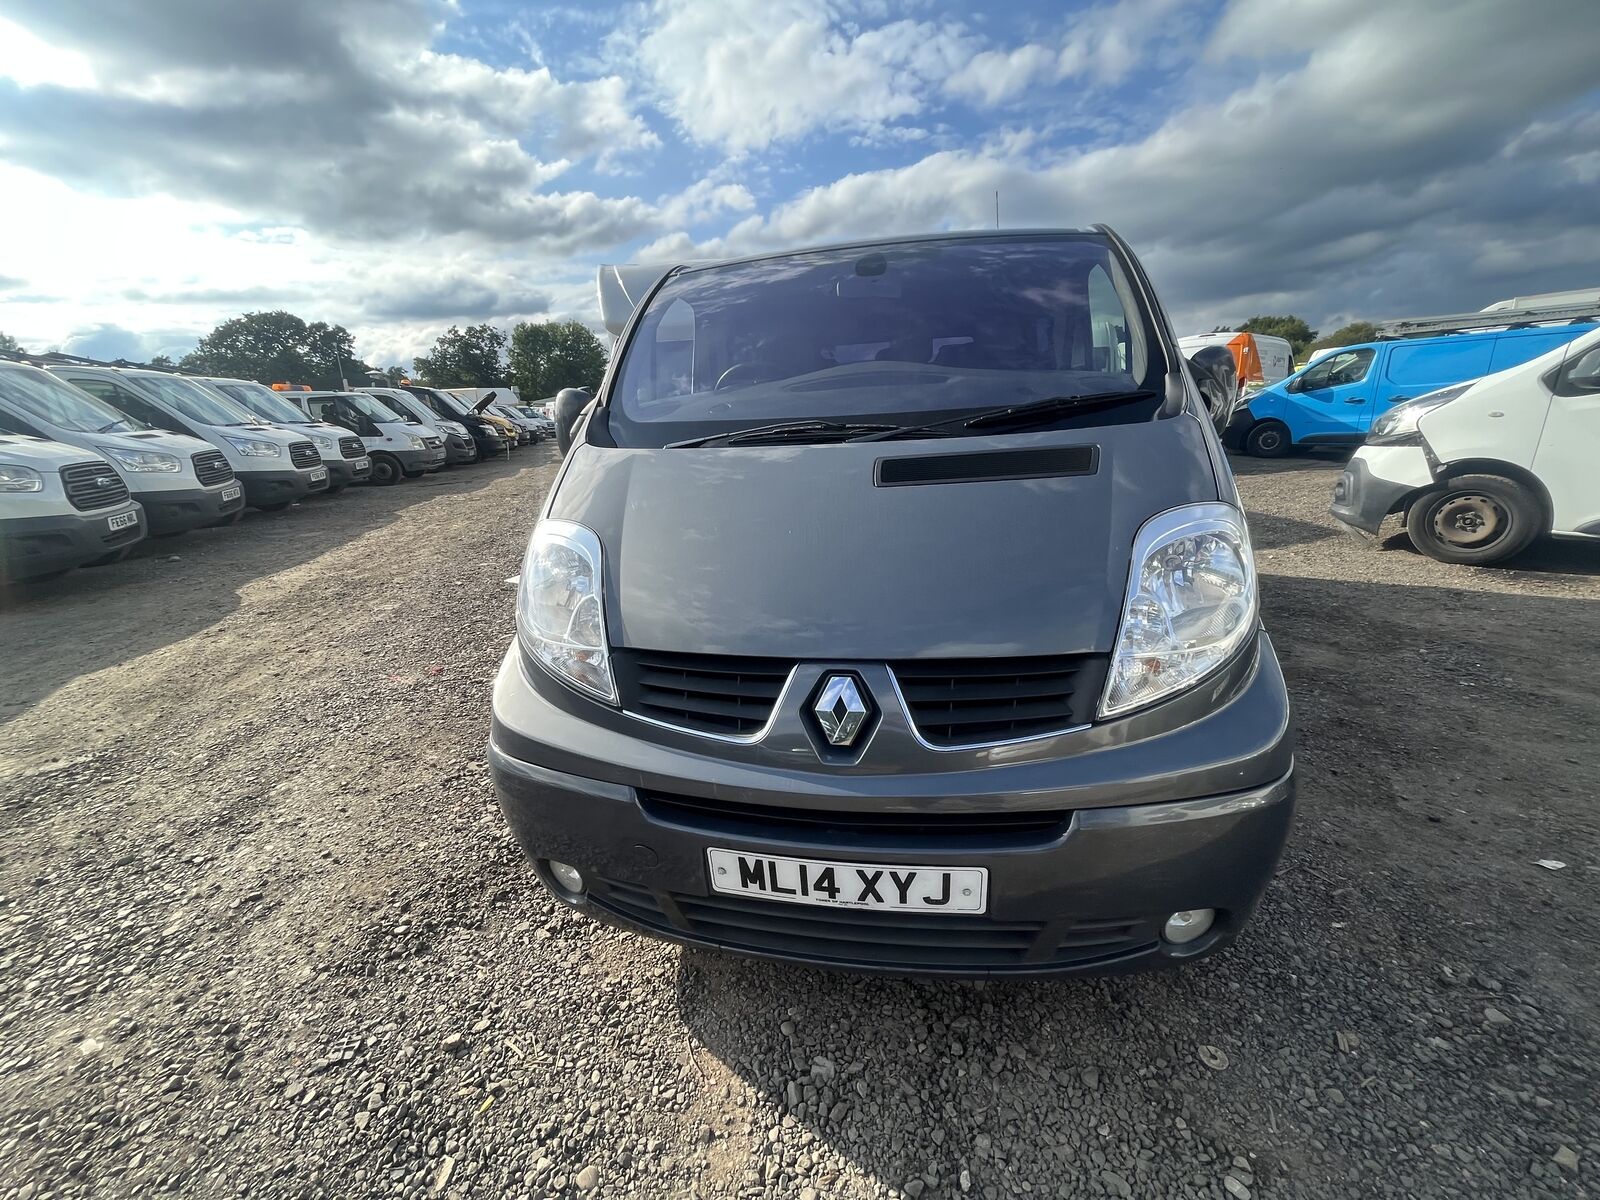 Bid on 2014 RENAULT TRAFIC MINIBUS: 9-SEATER LUXURY IN GREY, 9 SEATER DIESEL- Buy &amp; Sell on Auction with EAMA Group